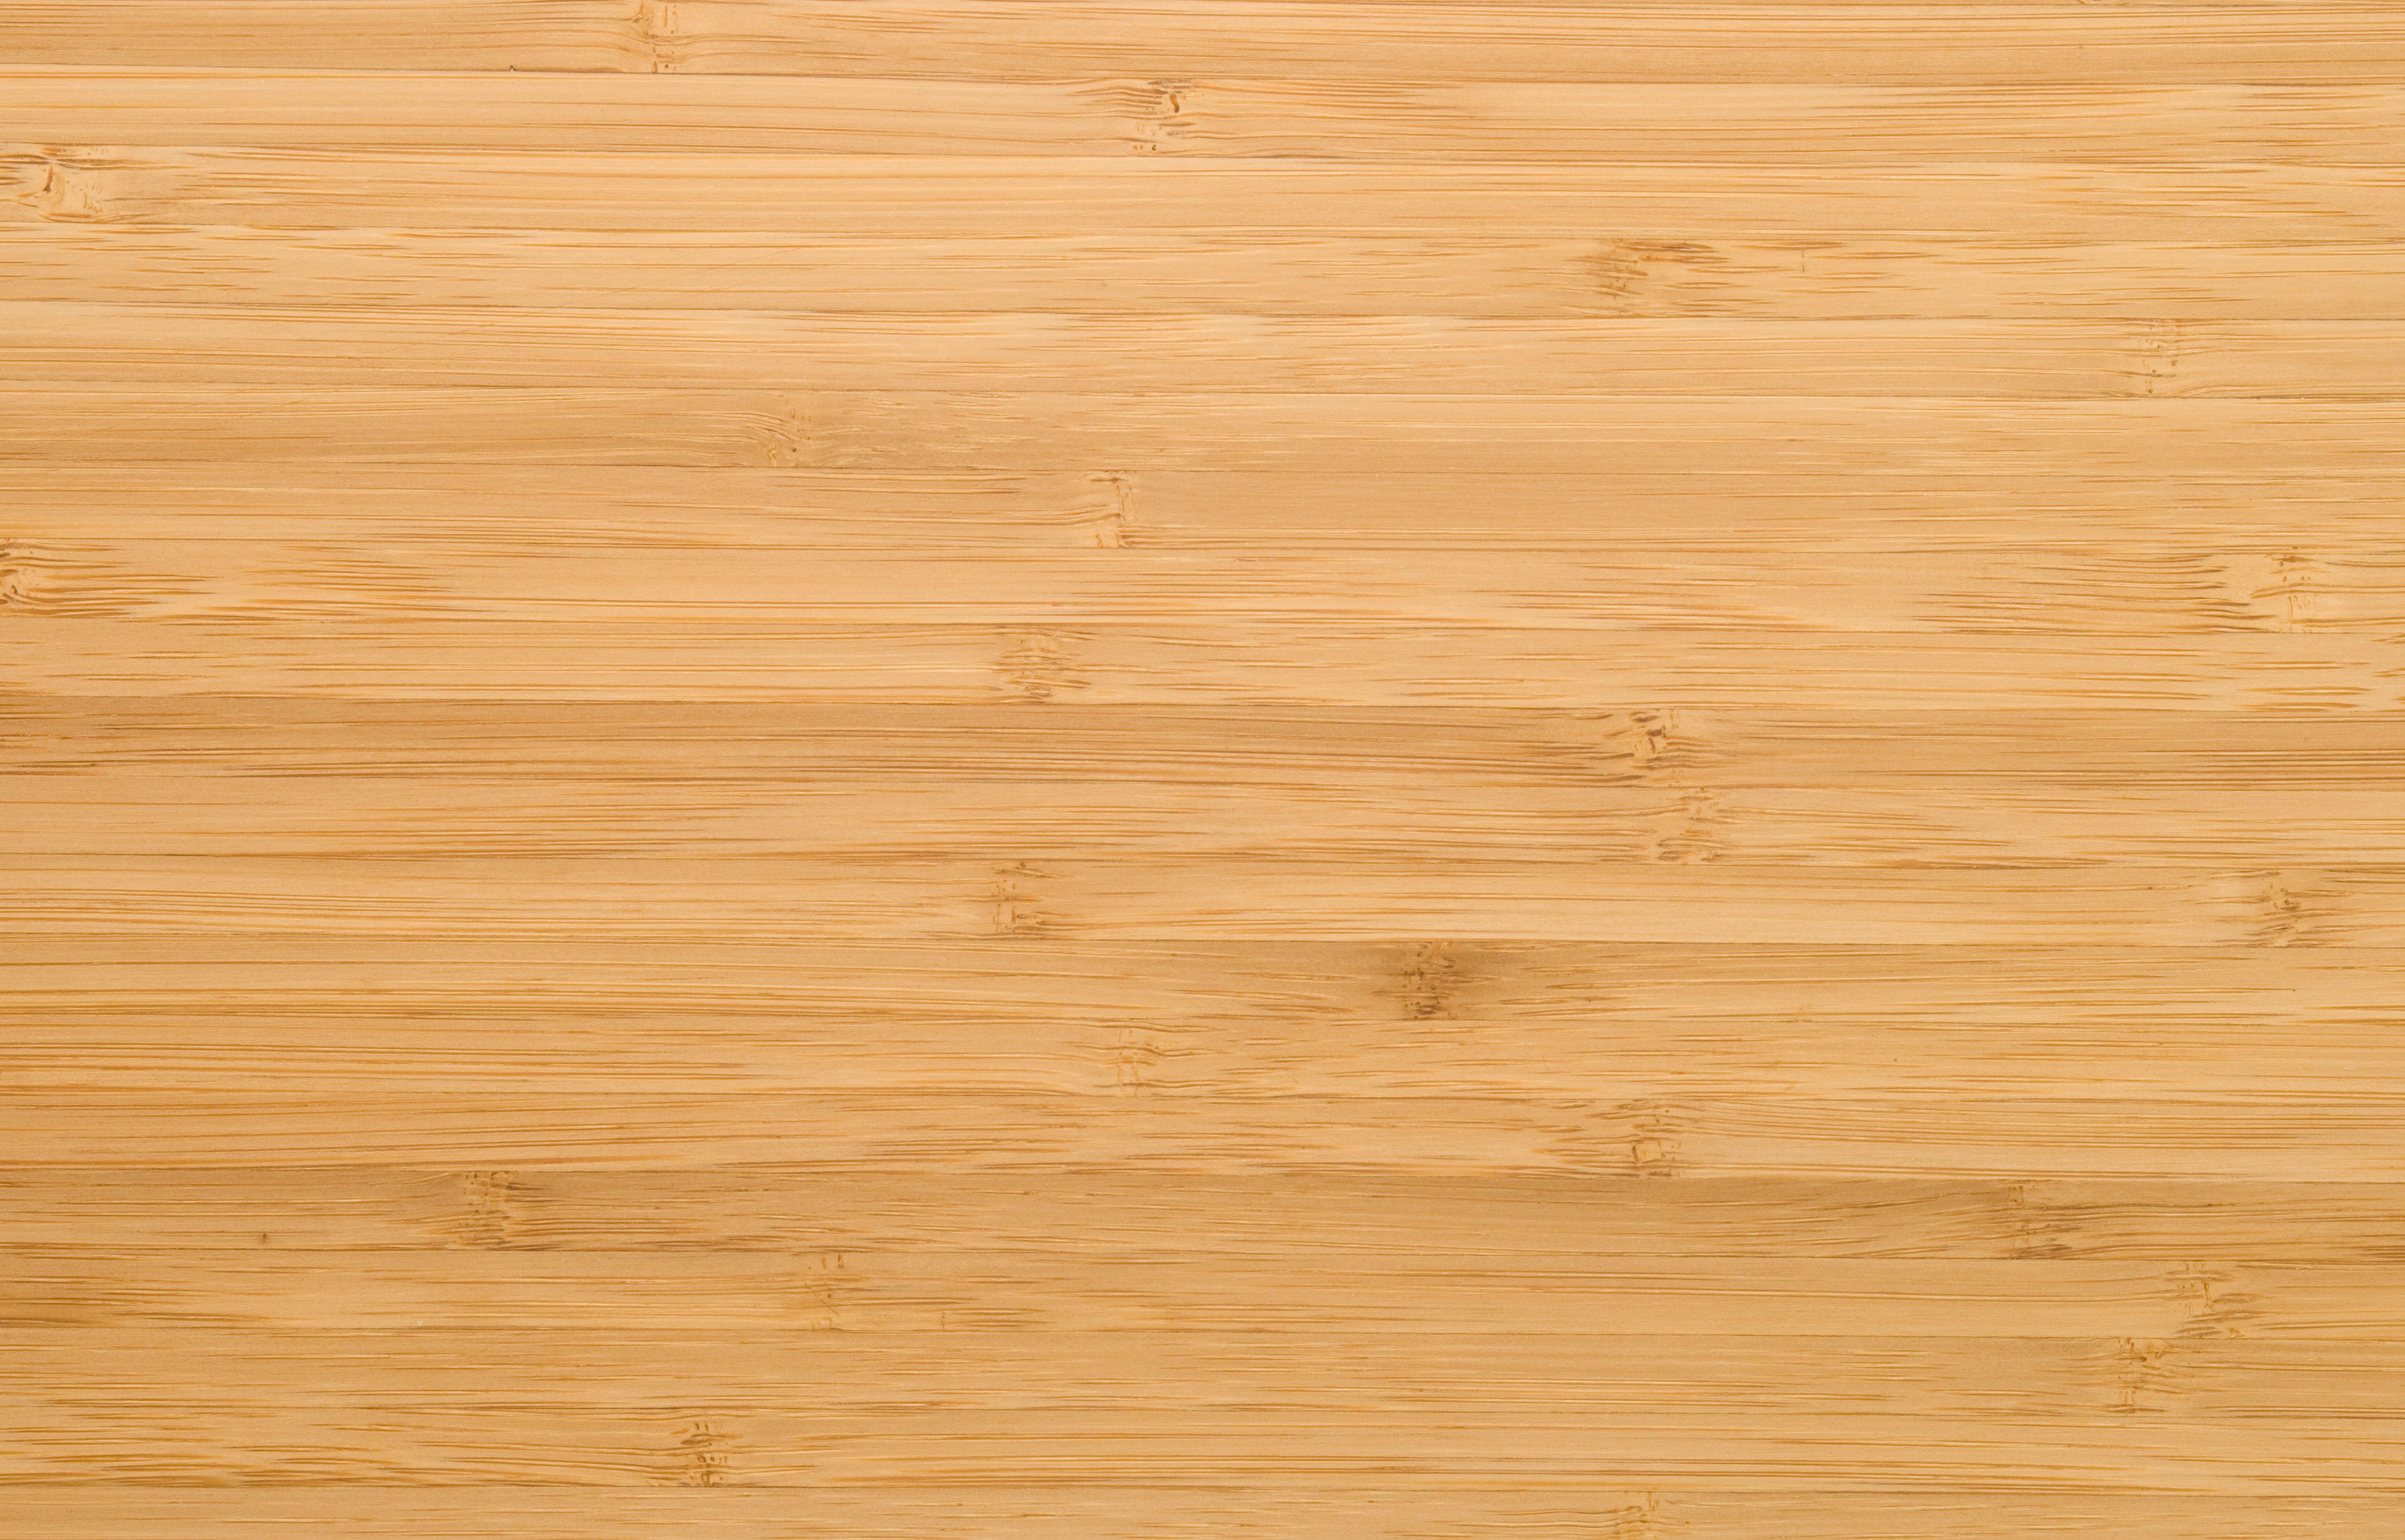 Cleaning and Maintaining Bamboo Floors